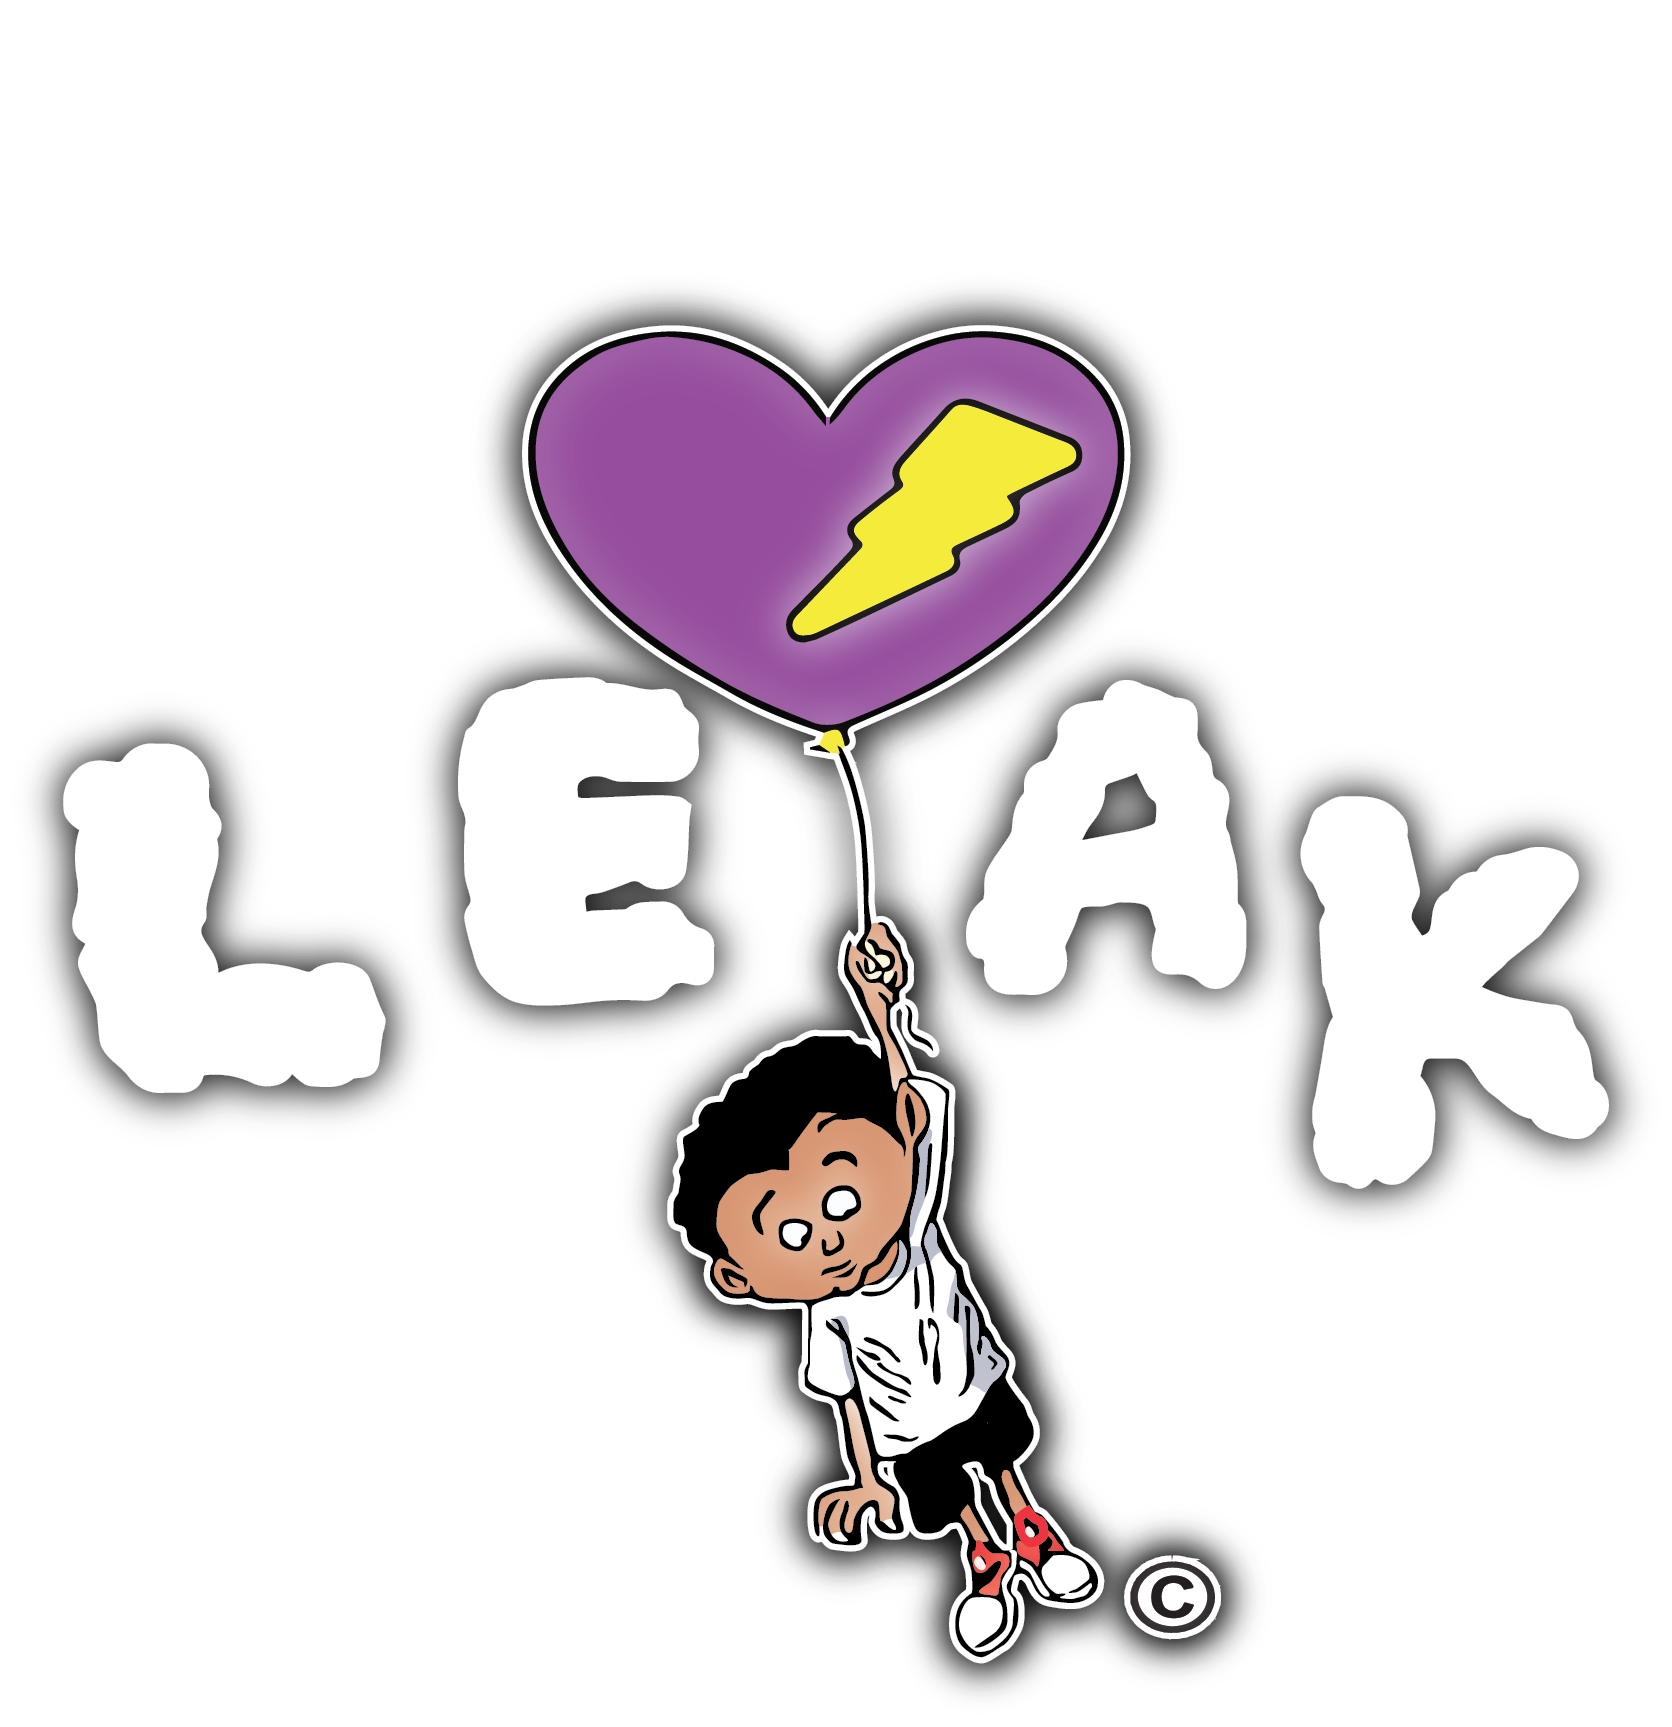 LEAK Clothing Collection